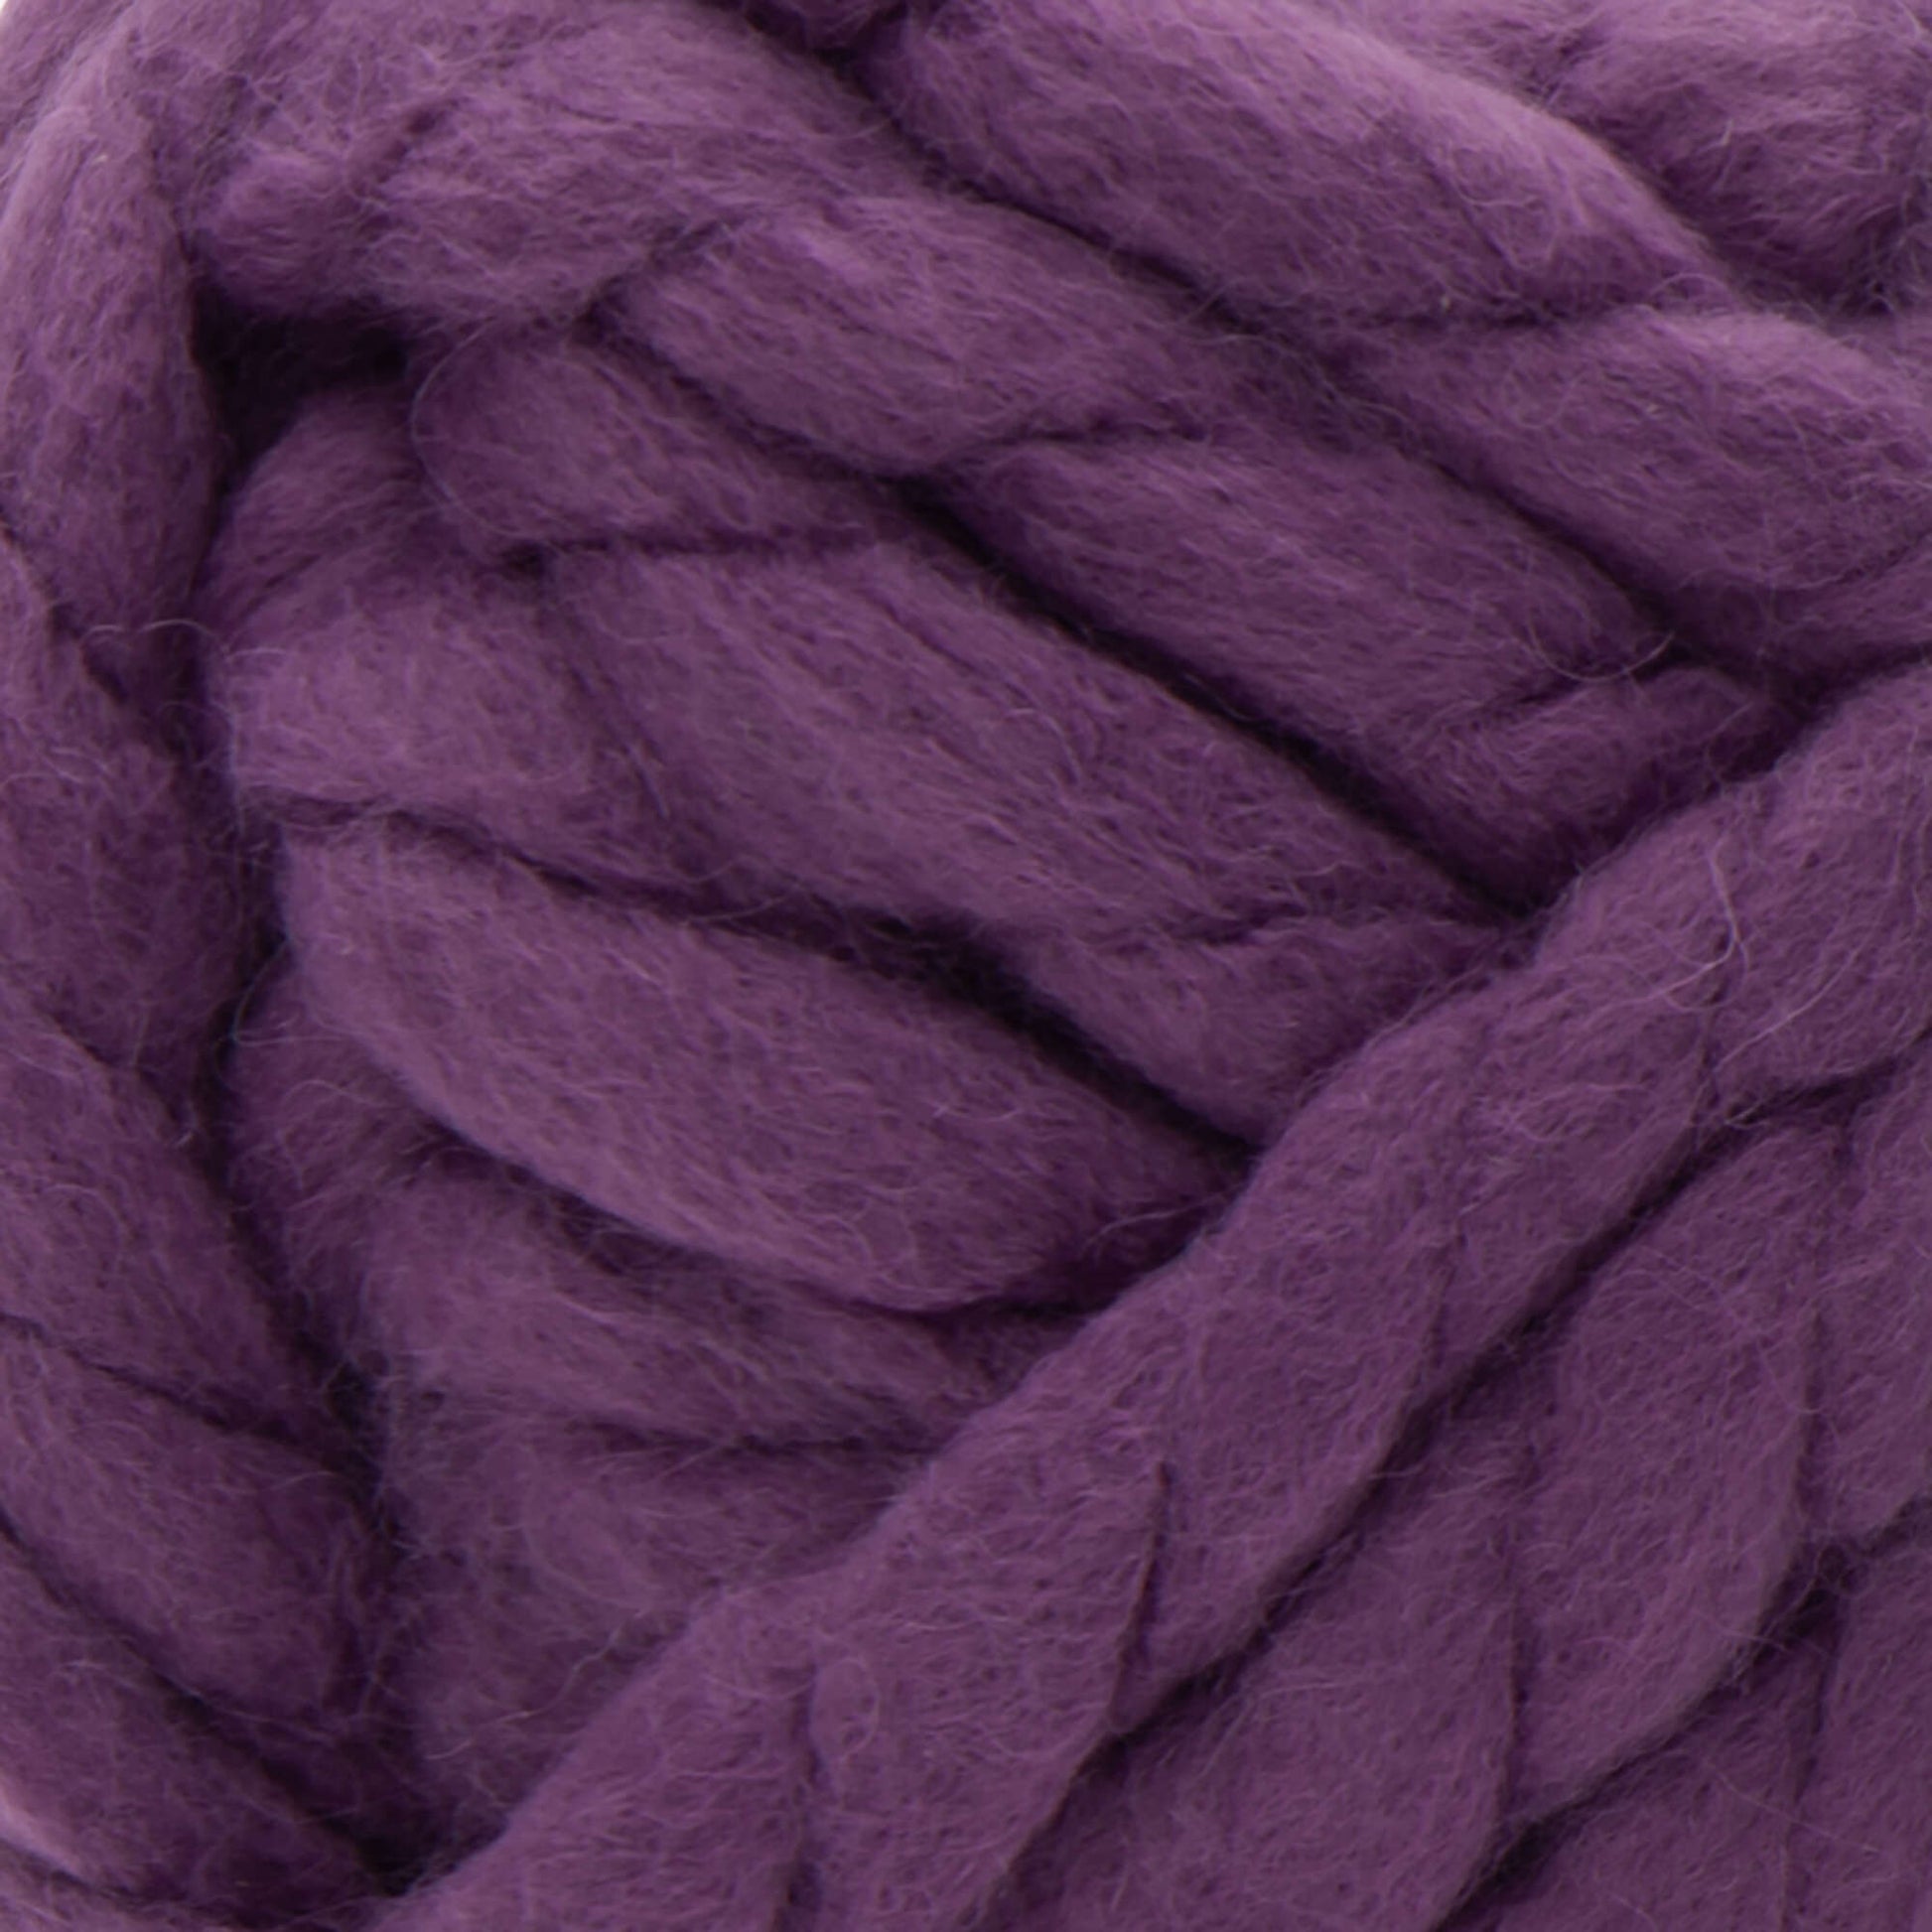 Red Heart Irresistible Yarn - Clearance shades Berry